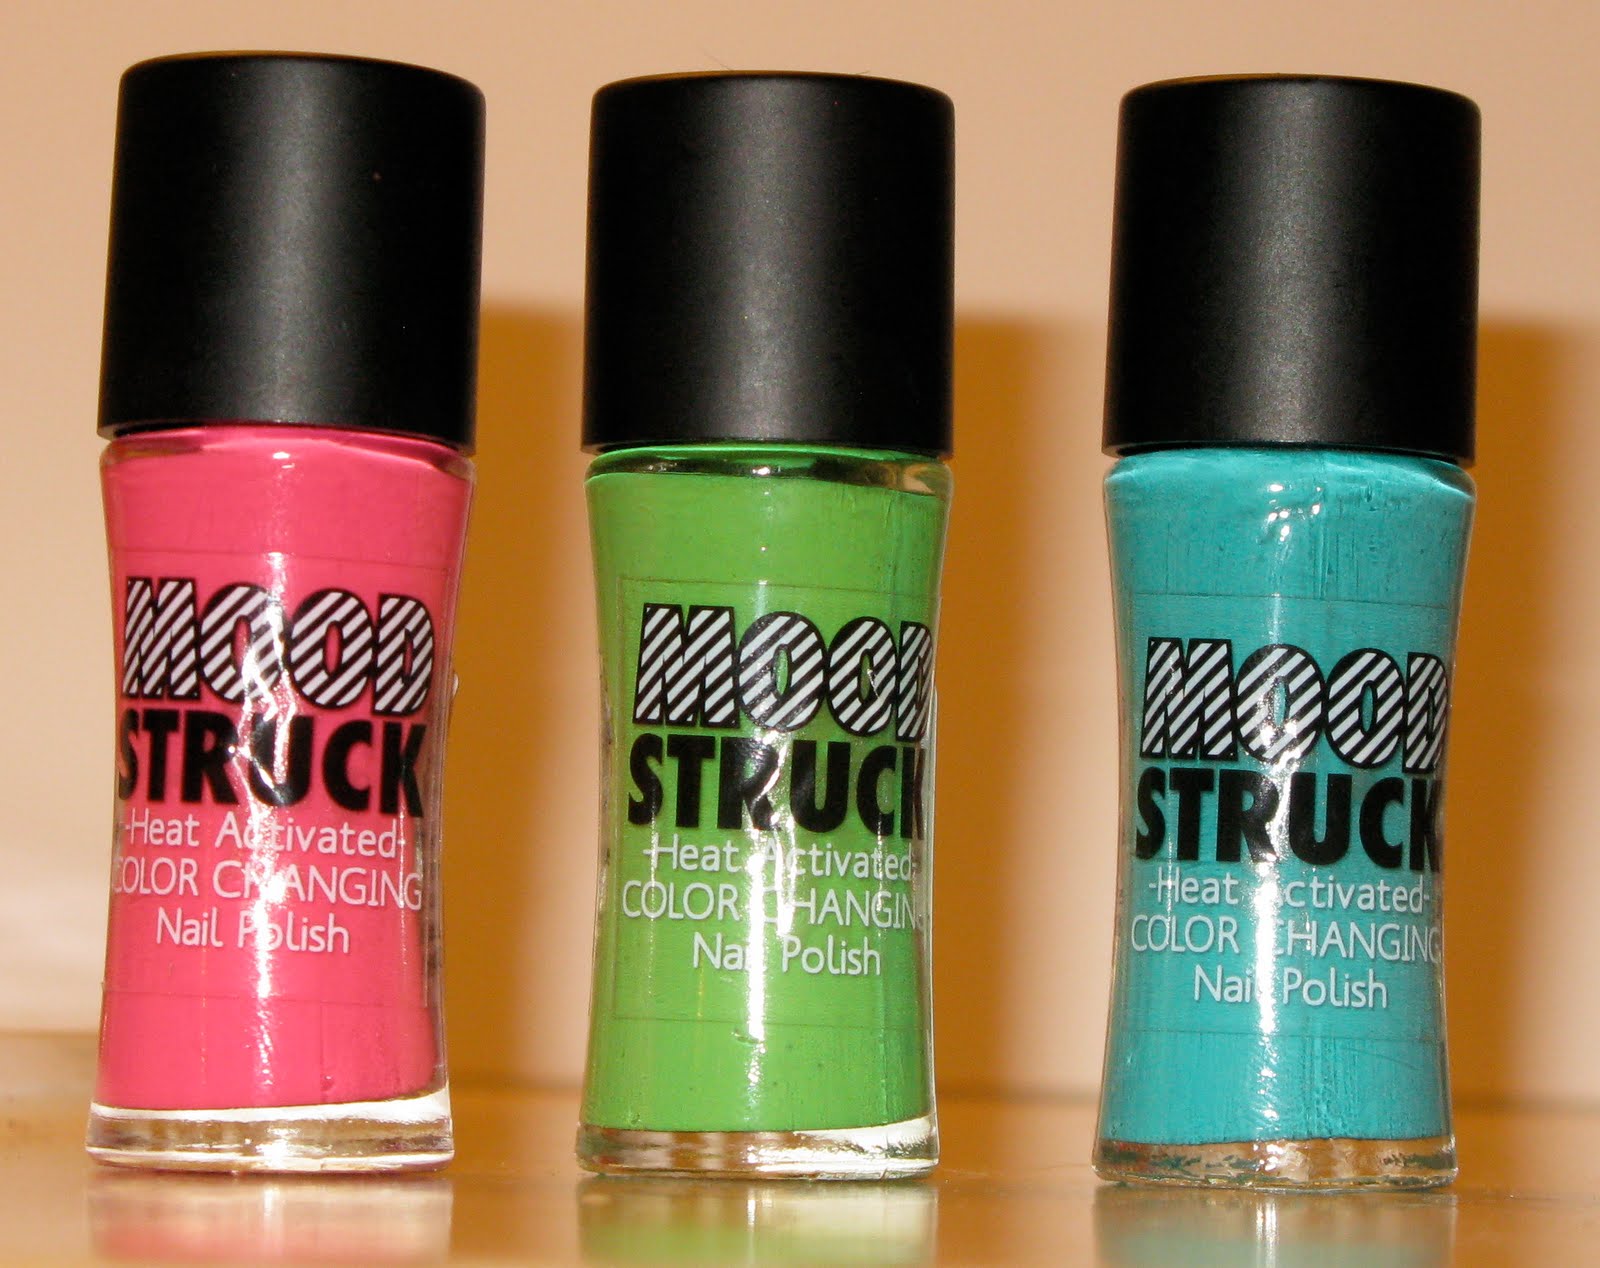 2. Mood Changing Nail Polish - Claire's - wide 2